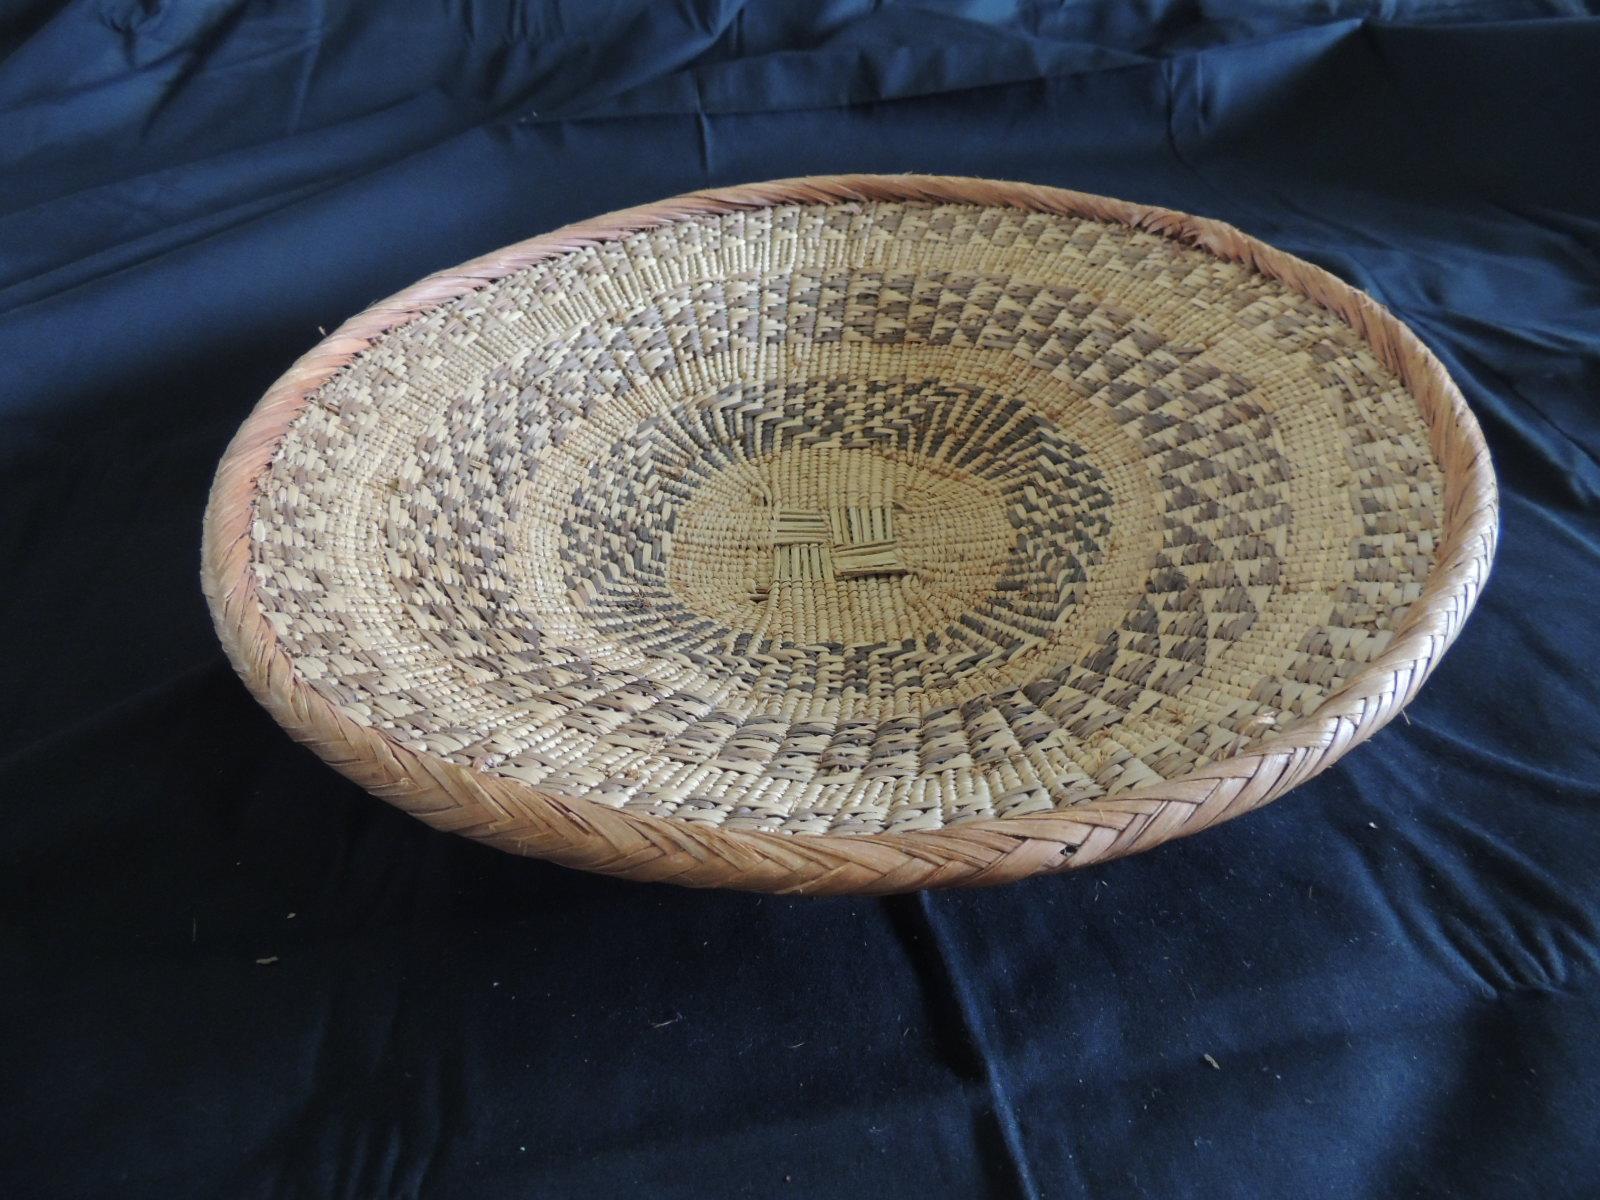 Zimbabwean Large Tribal Round Woven Basket in Natural and Brown with Braided Rim